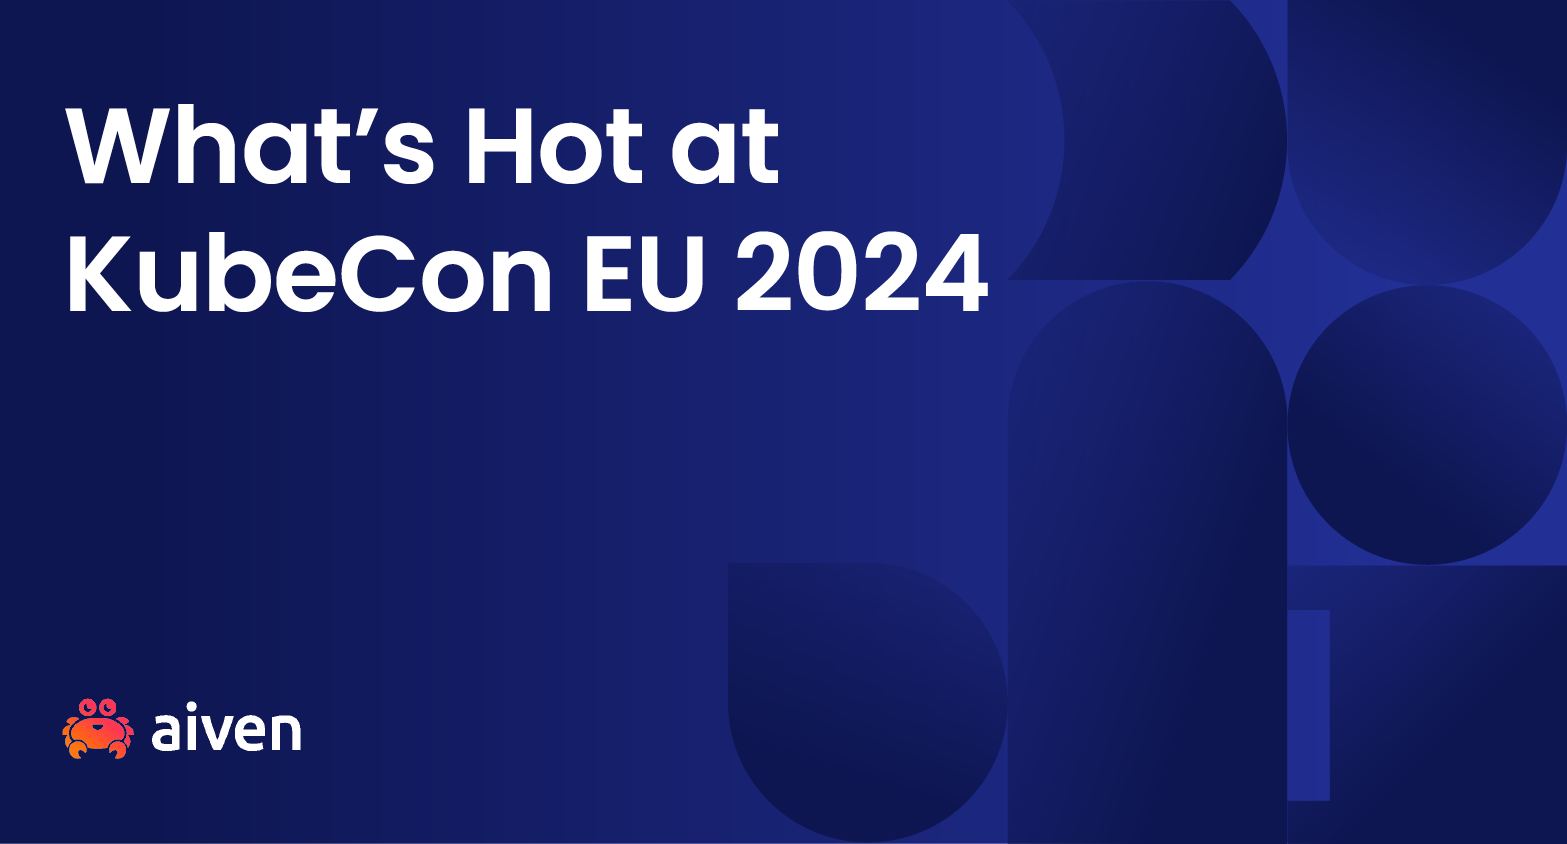 The words "What's hot at KubeCon EU 2024" in white on a blue background. The Aiven logo is in the bottom left.